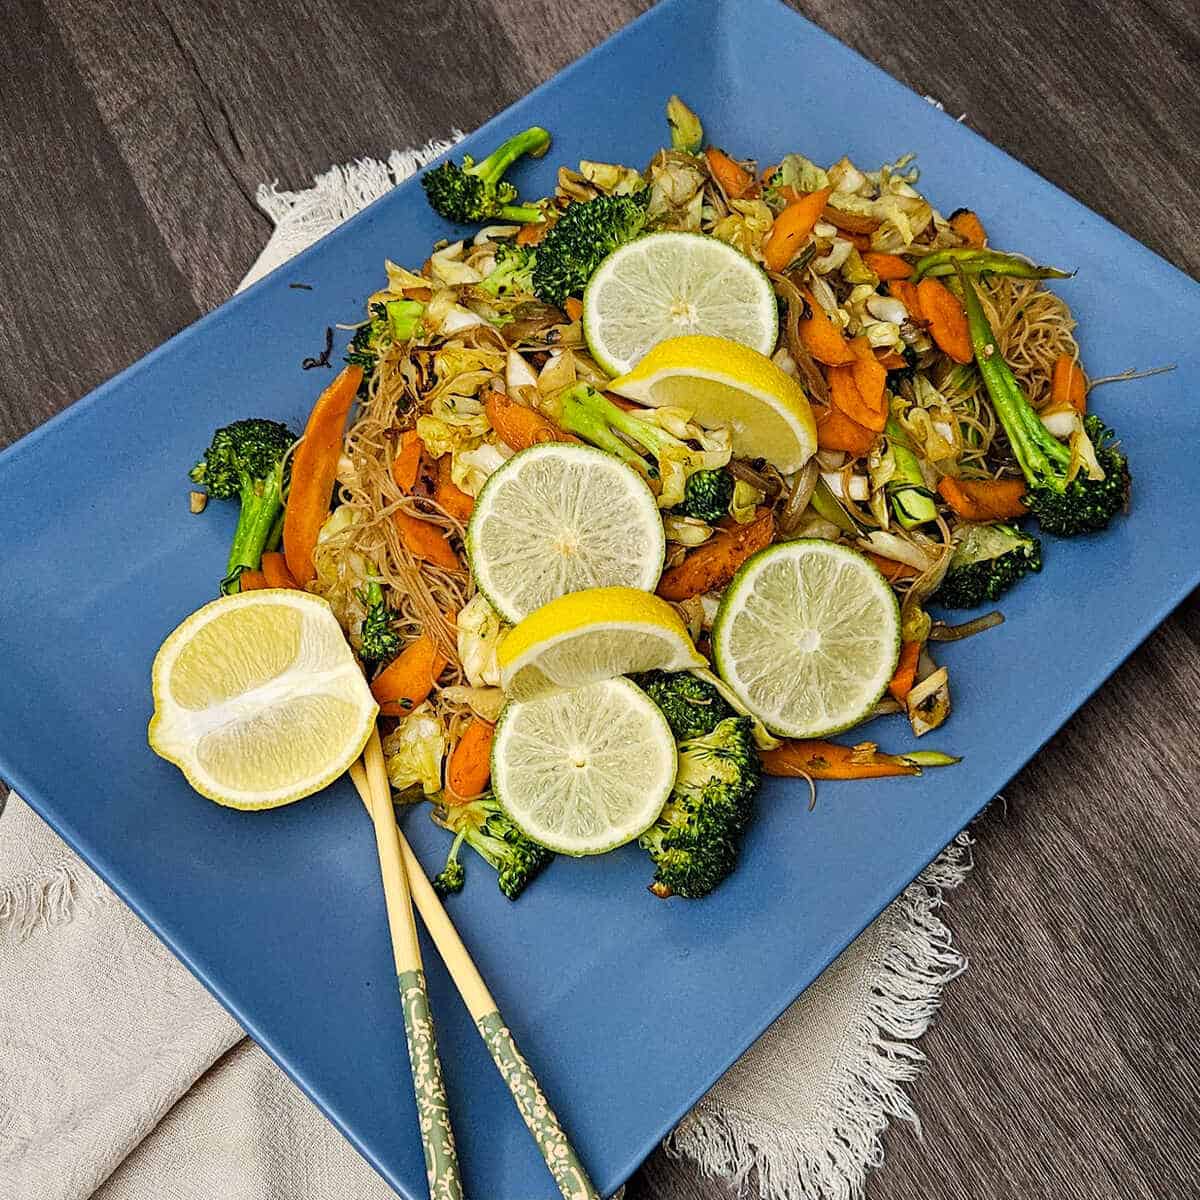 finished easy Asian vegetable stir fry rice noodles on a plate garnished with lemon wedges and lime slices, and chop sticks